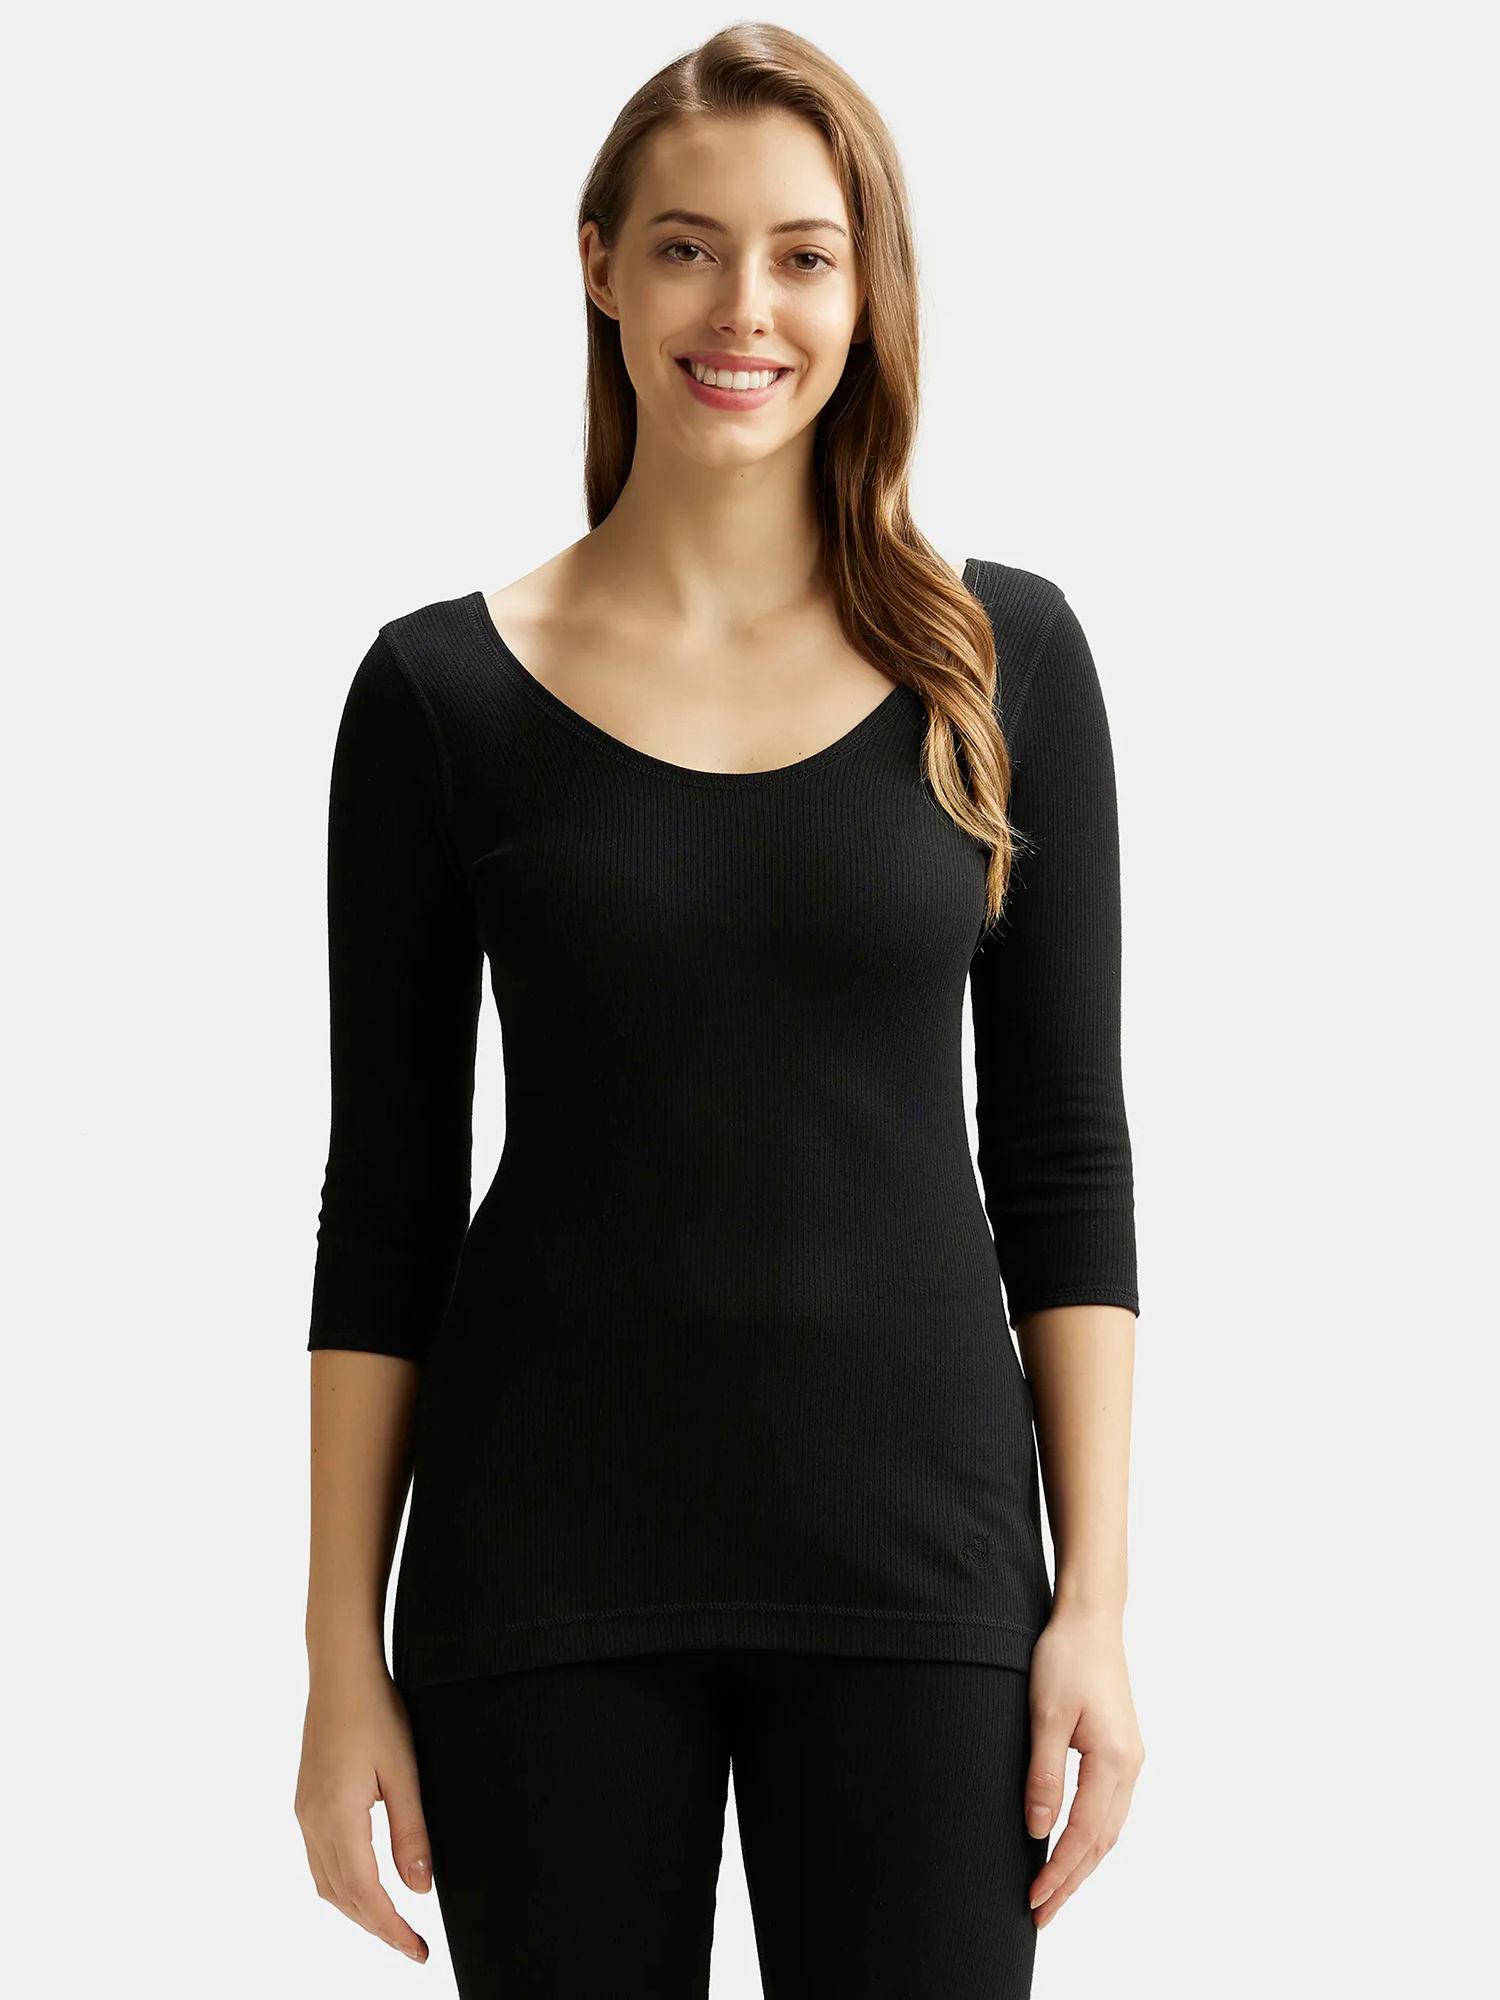 black thermal 3 quarter sleeve top : style number # 2503